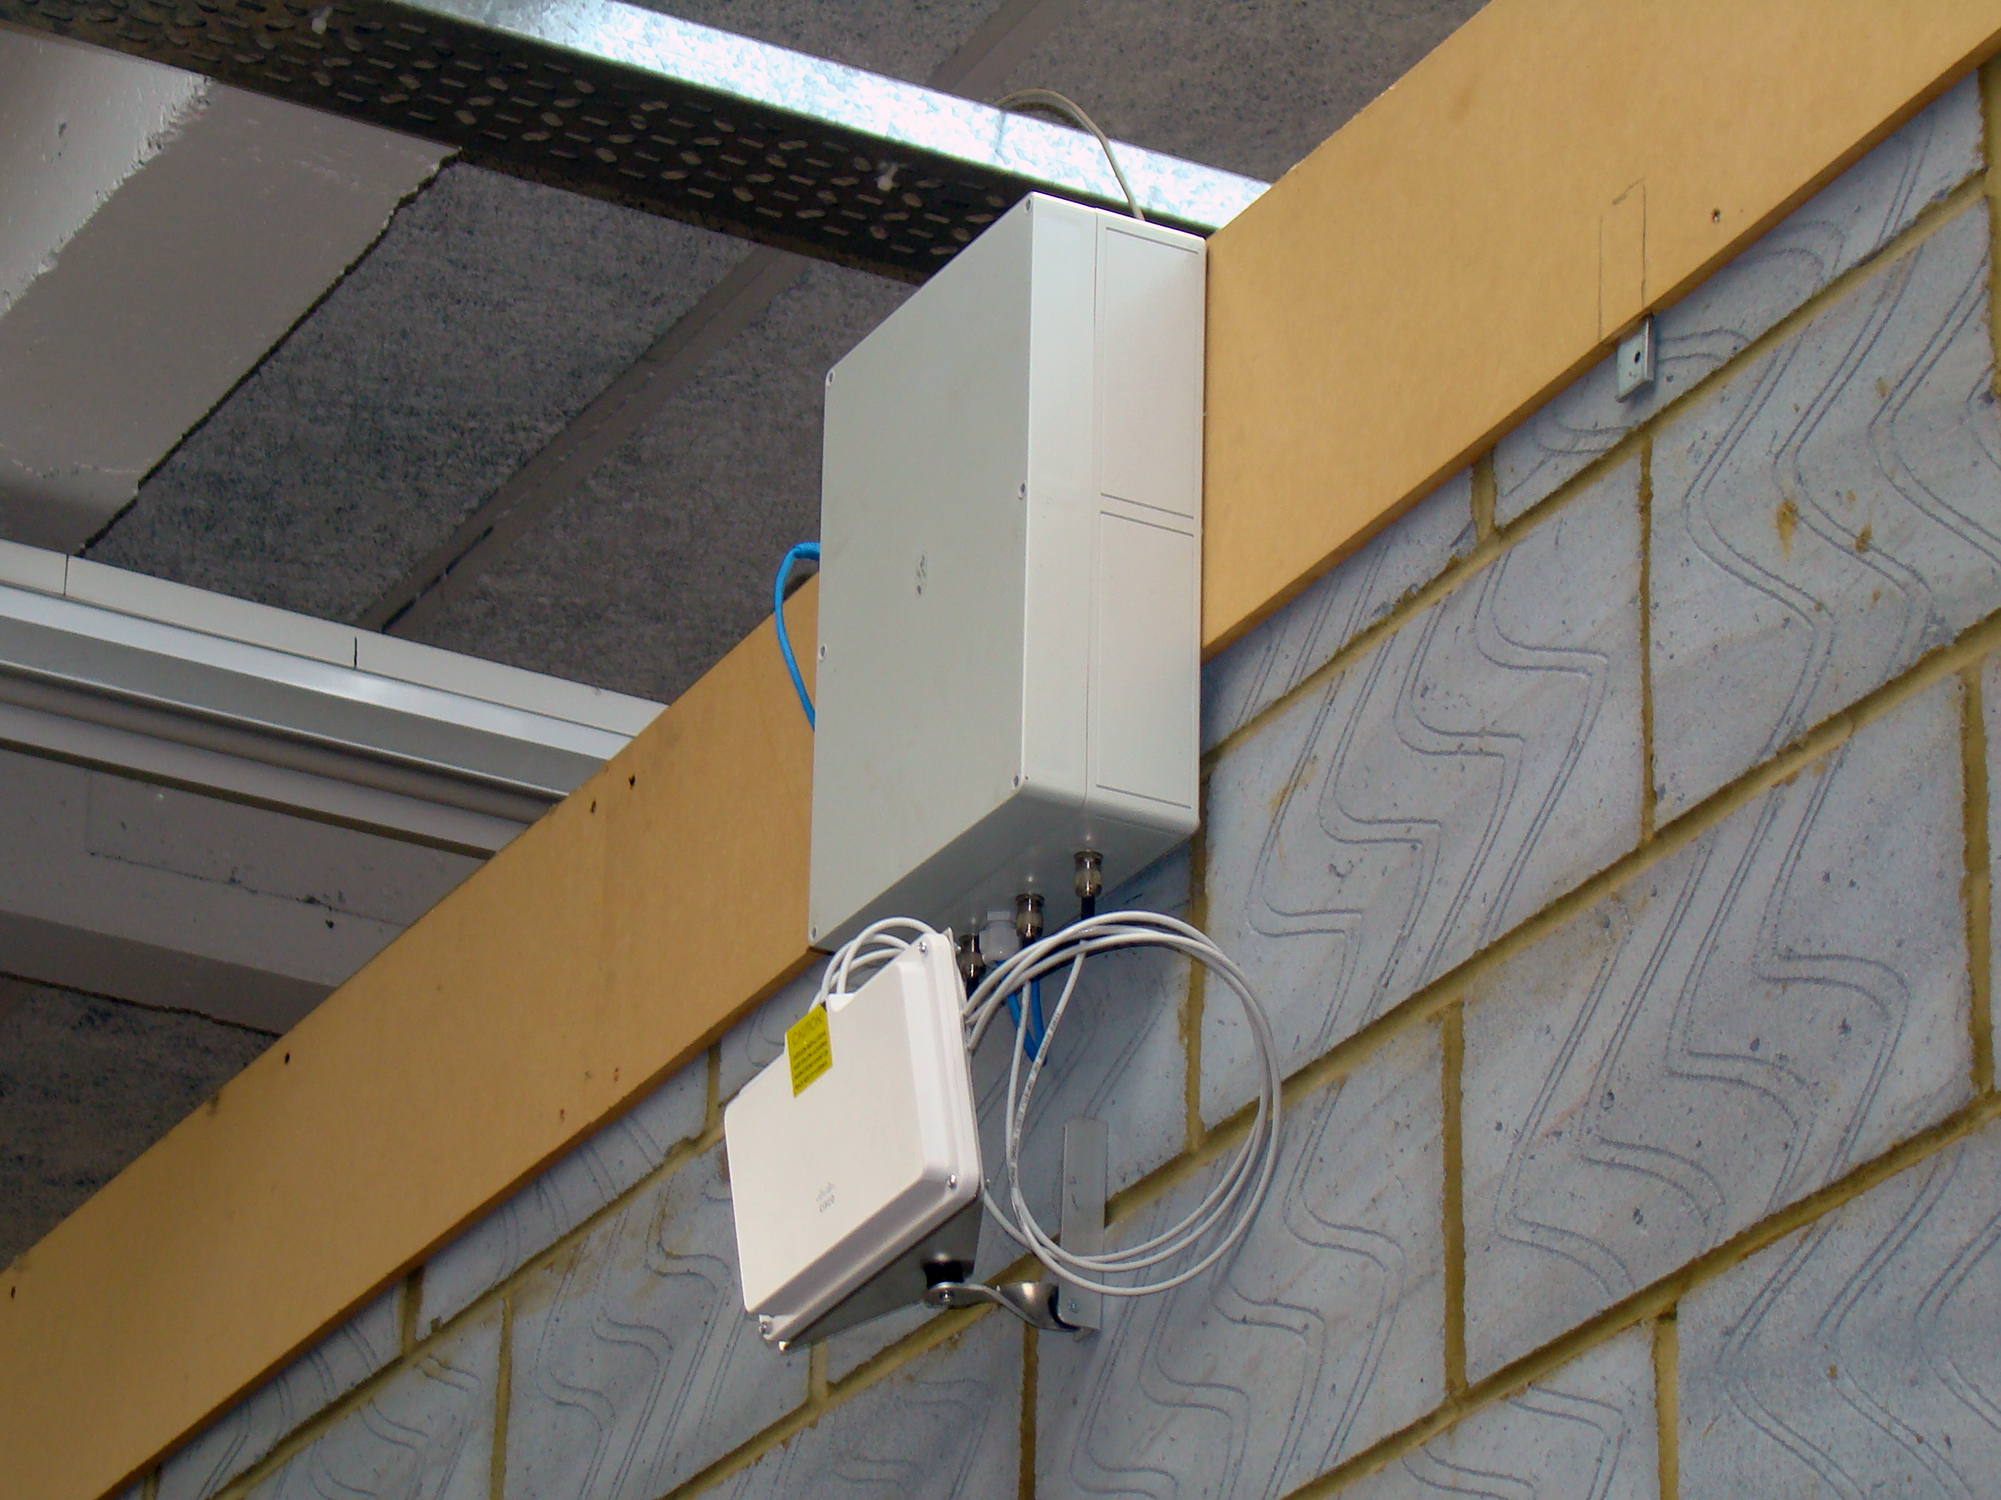 Enclosures IP rating to protect the Wi-Fi access point inside the enclosure from water damage.